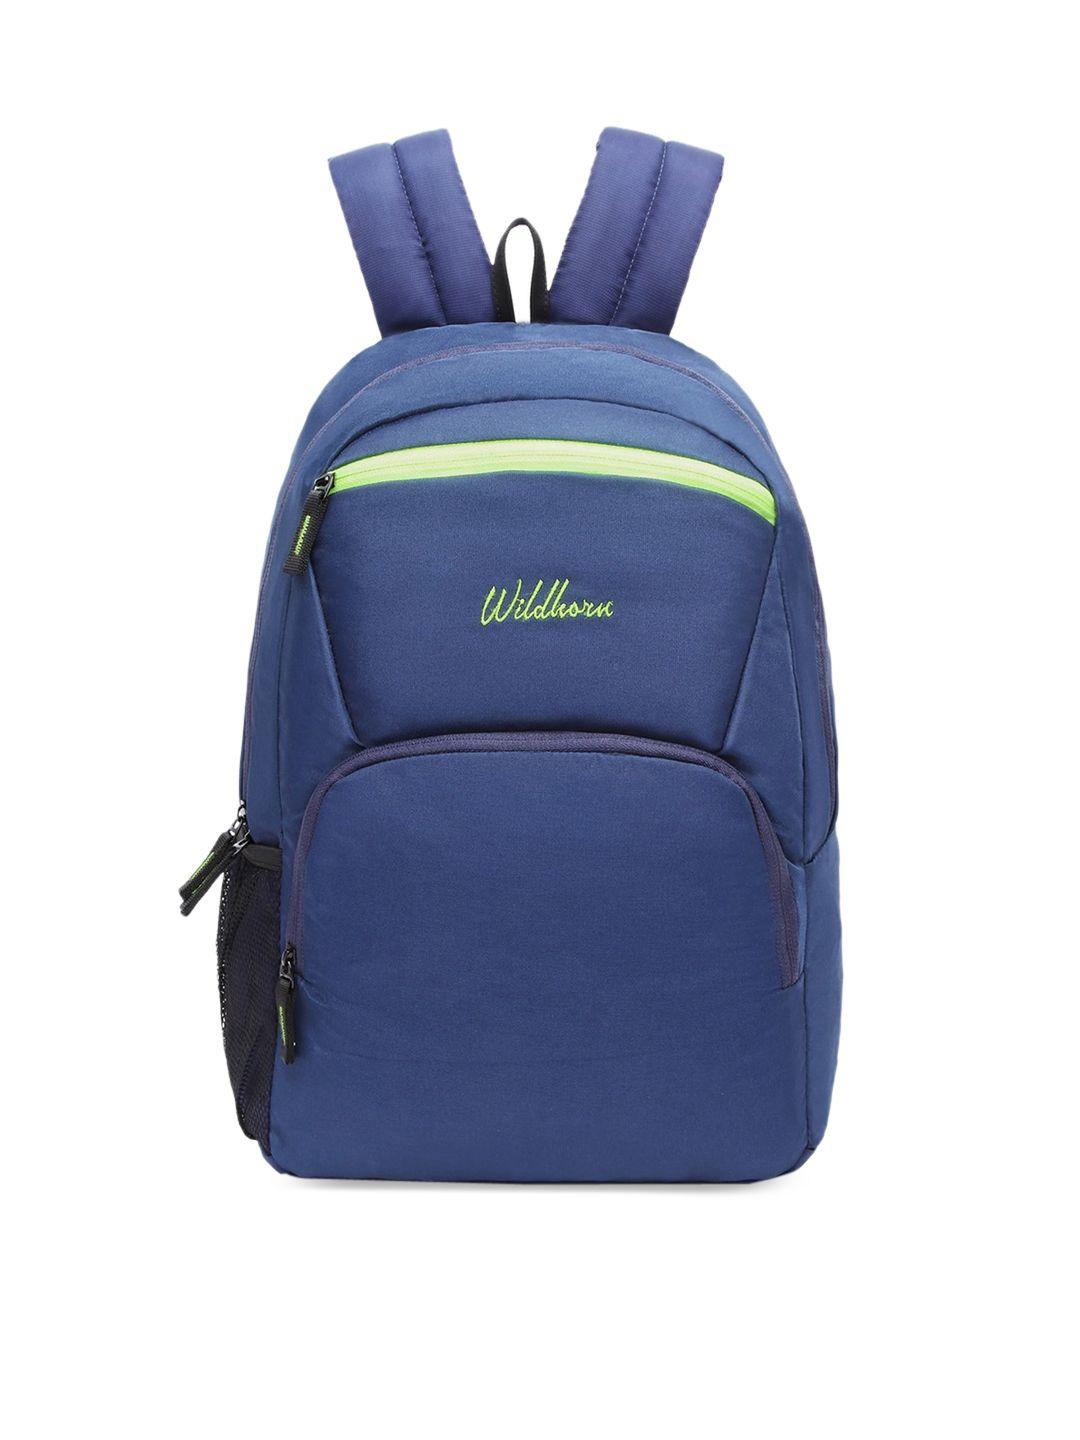 wildhorn unisex blue & green backpack with compression straps